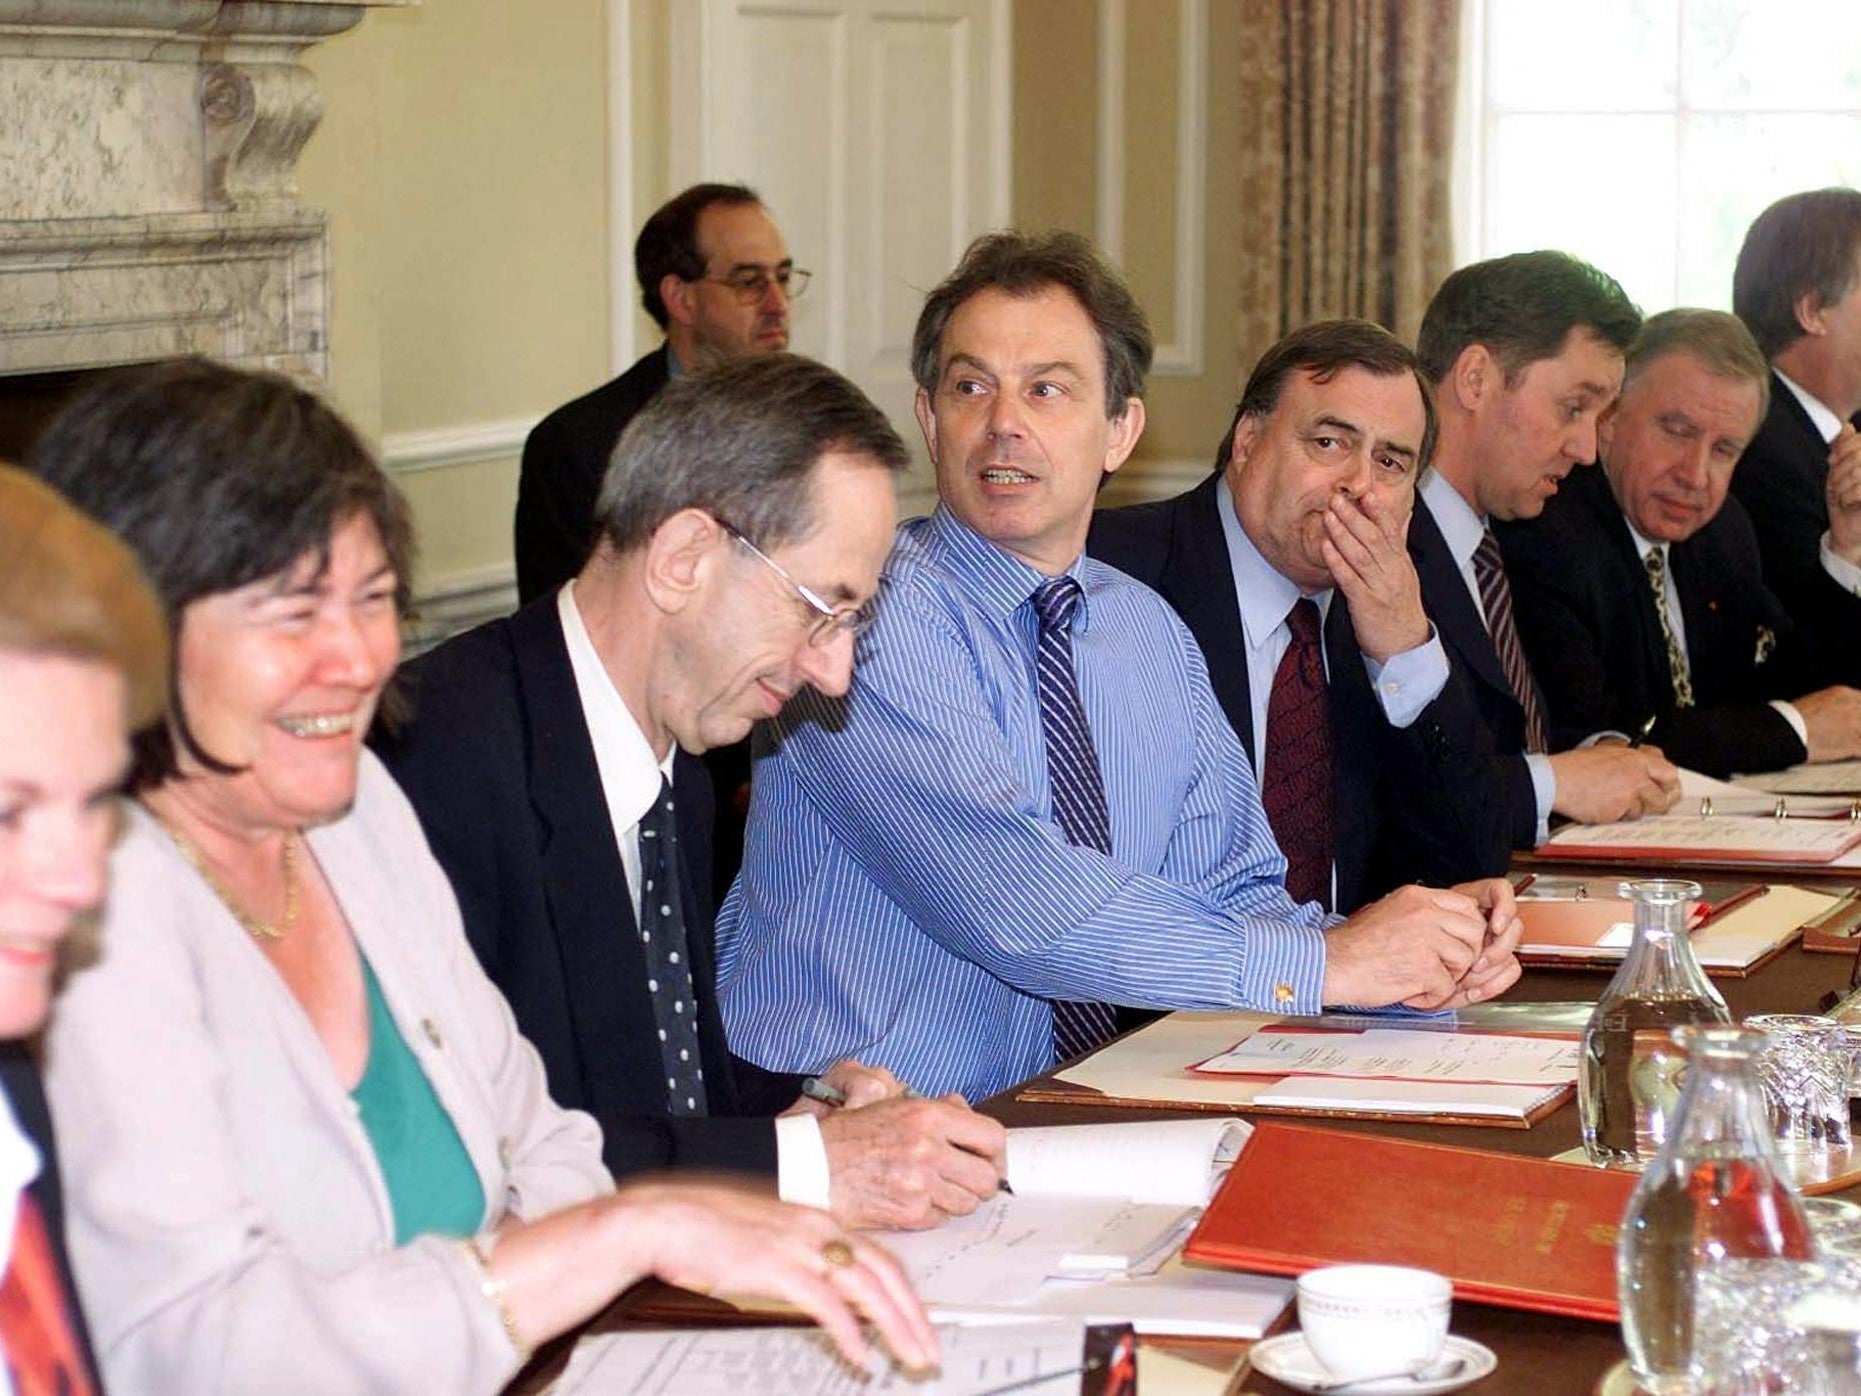 Tony Blair, centre, with his cabinet in 2001. Alan Milburn sits third from the right